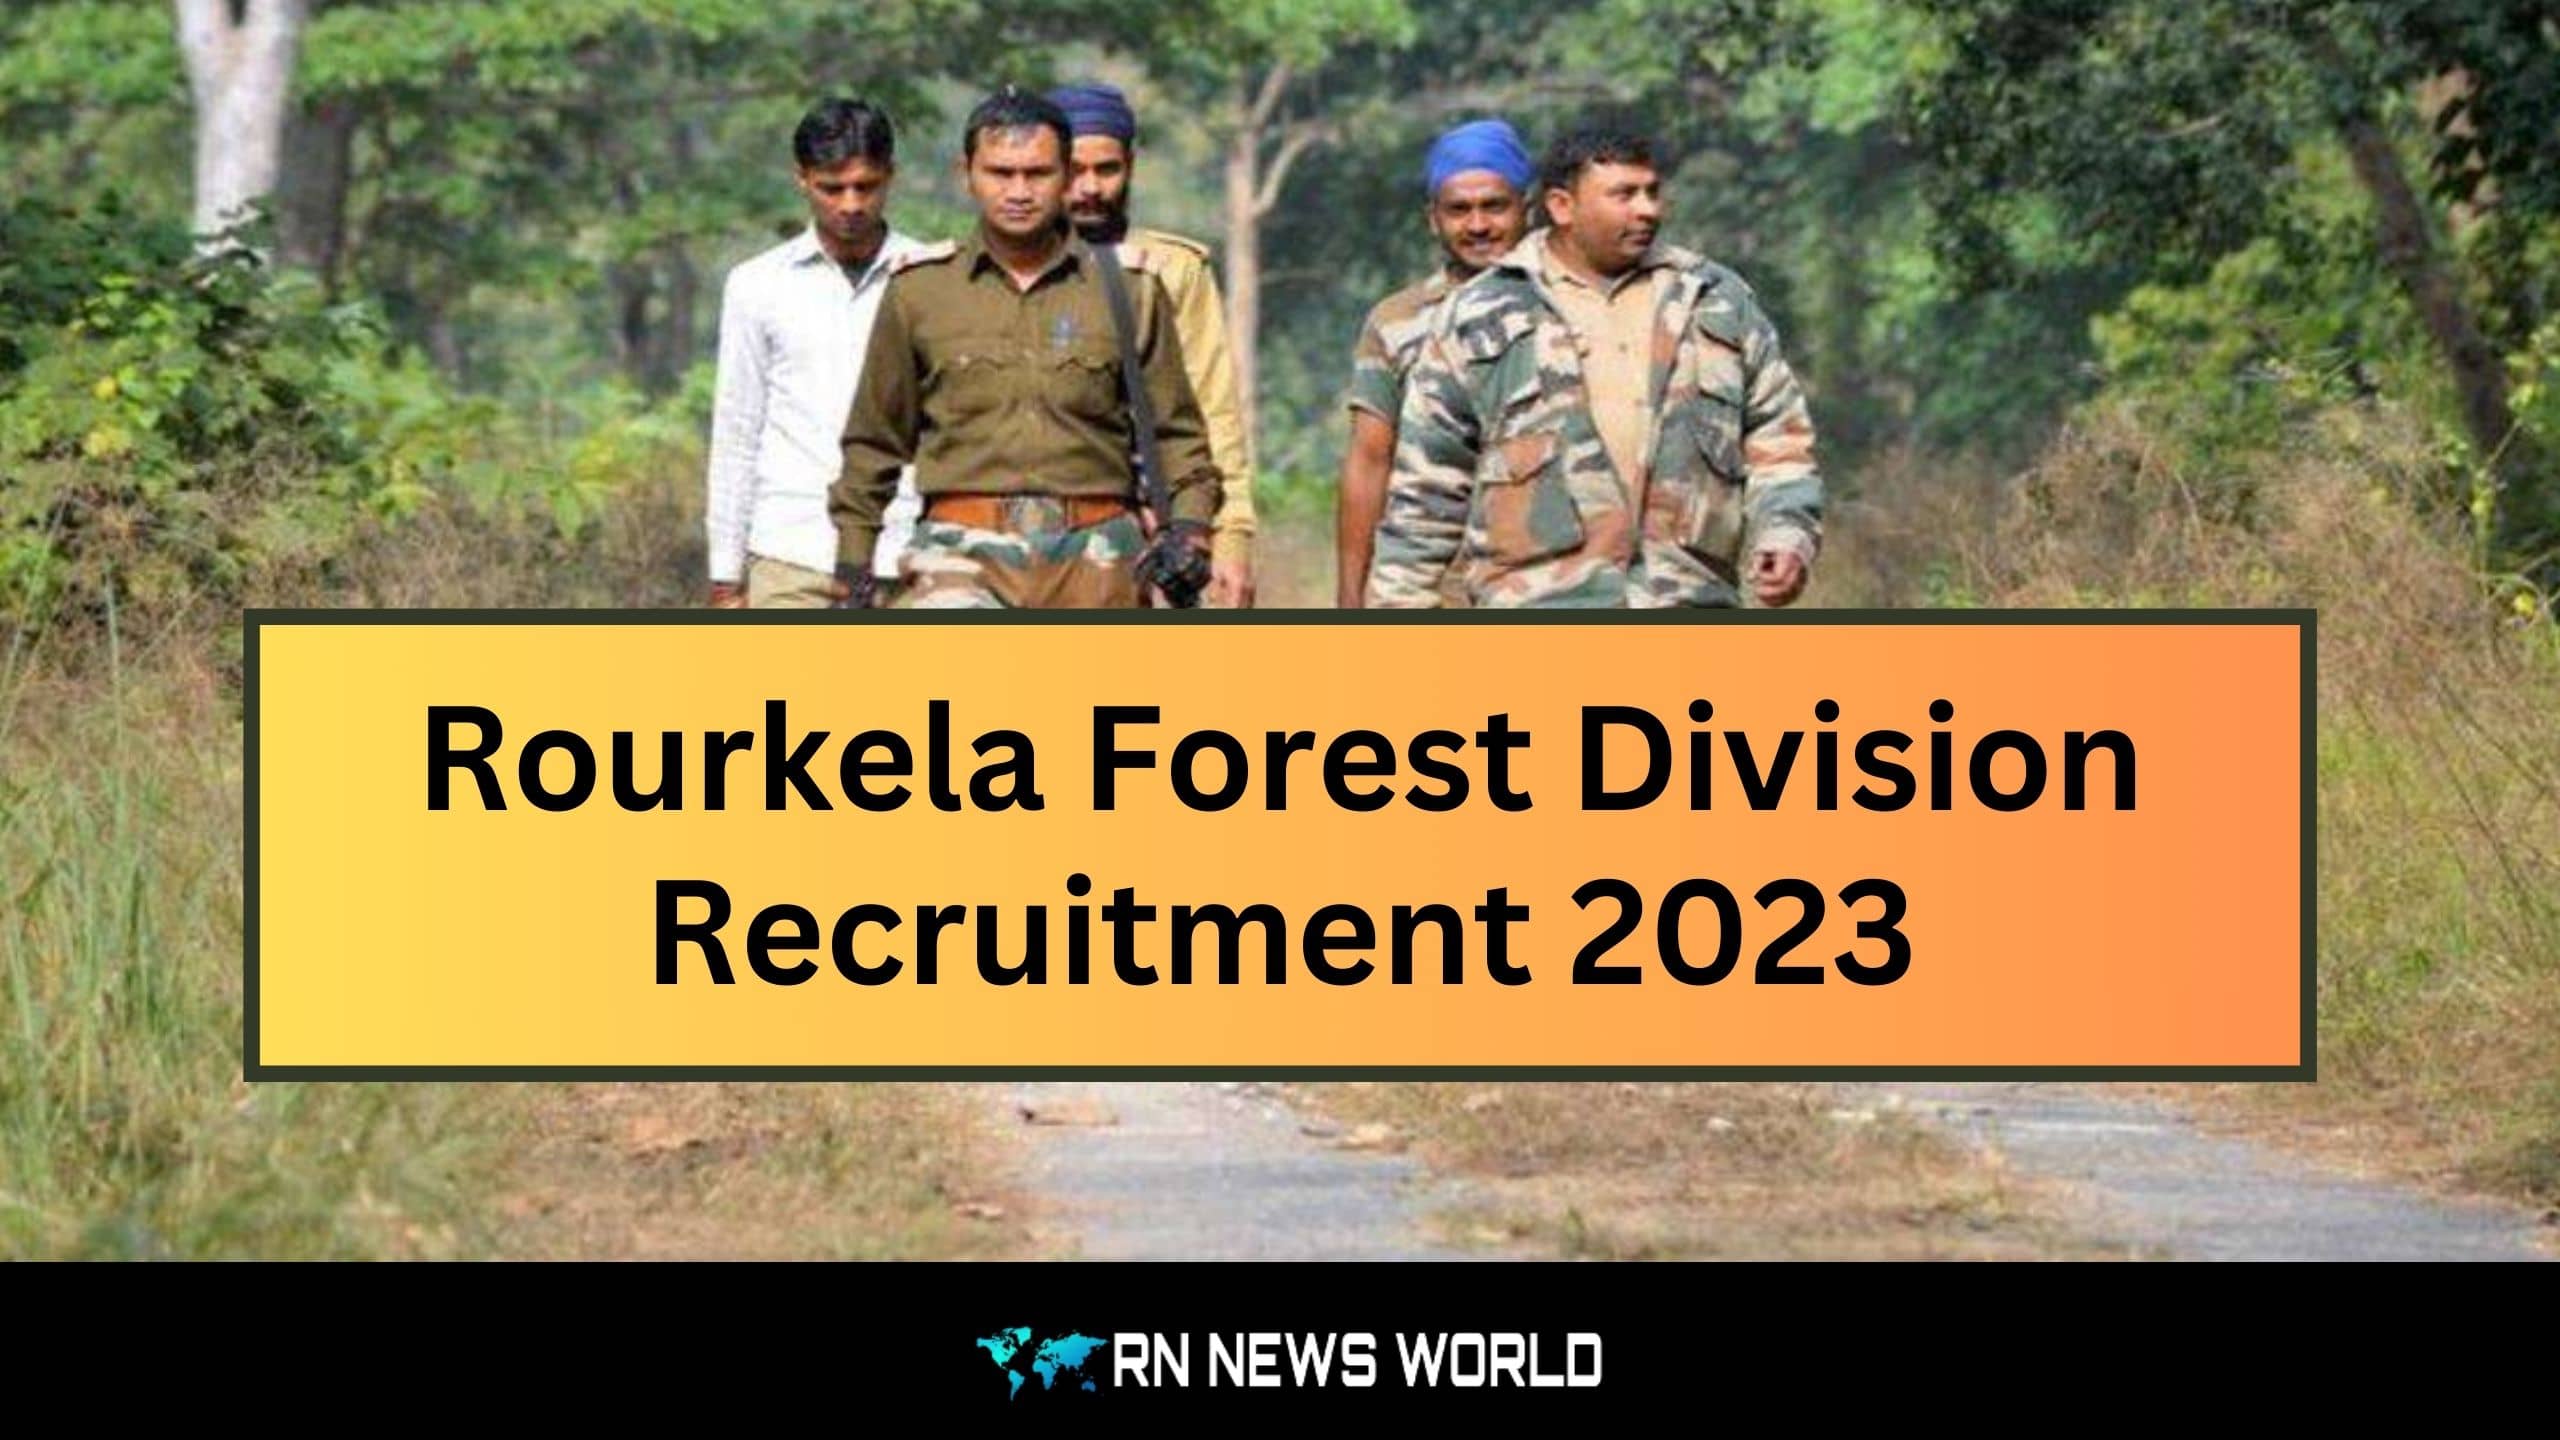 ourkela-forest-division